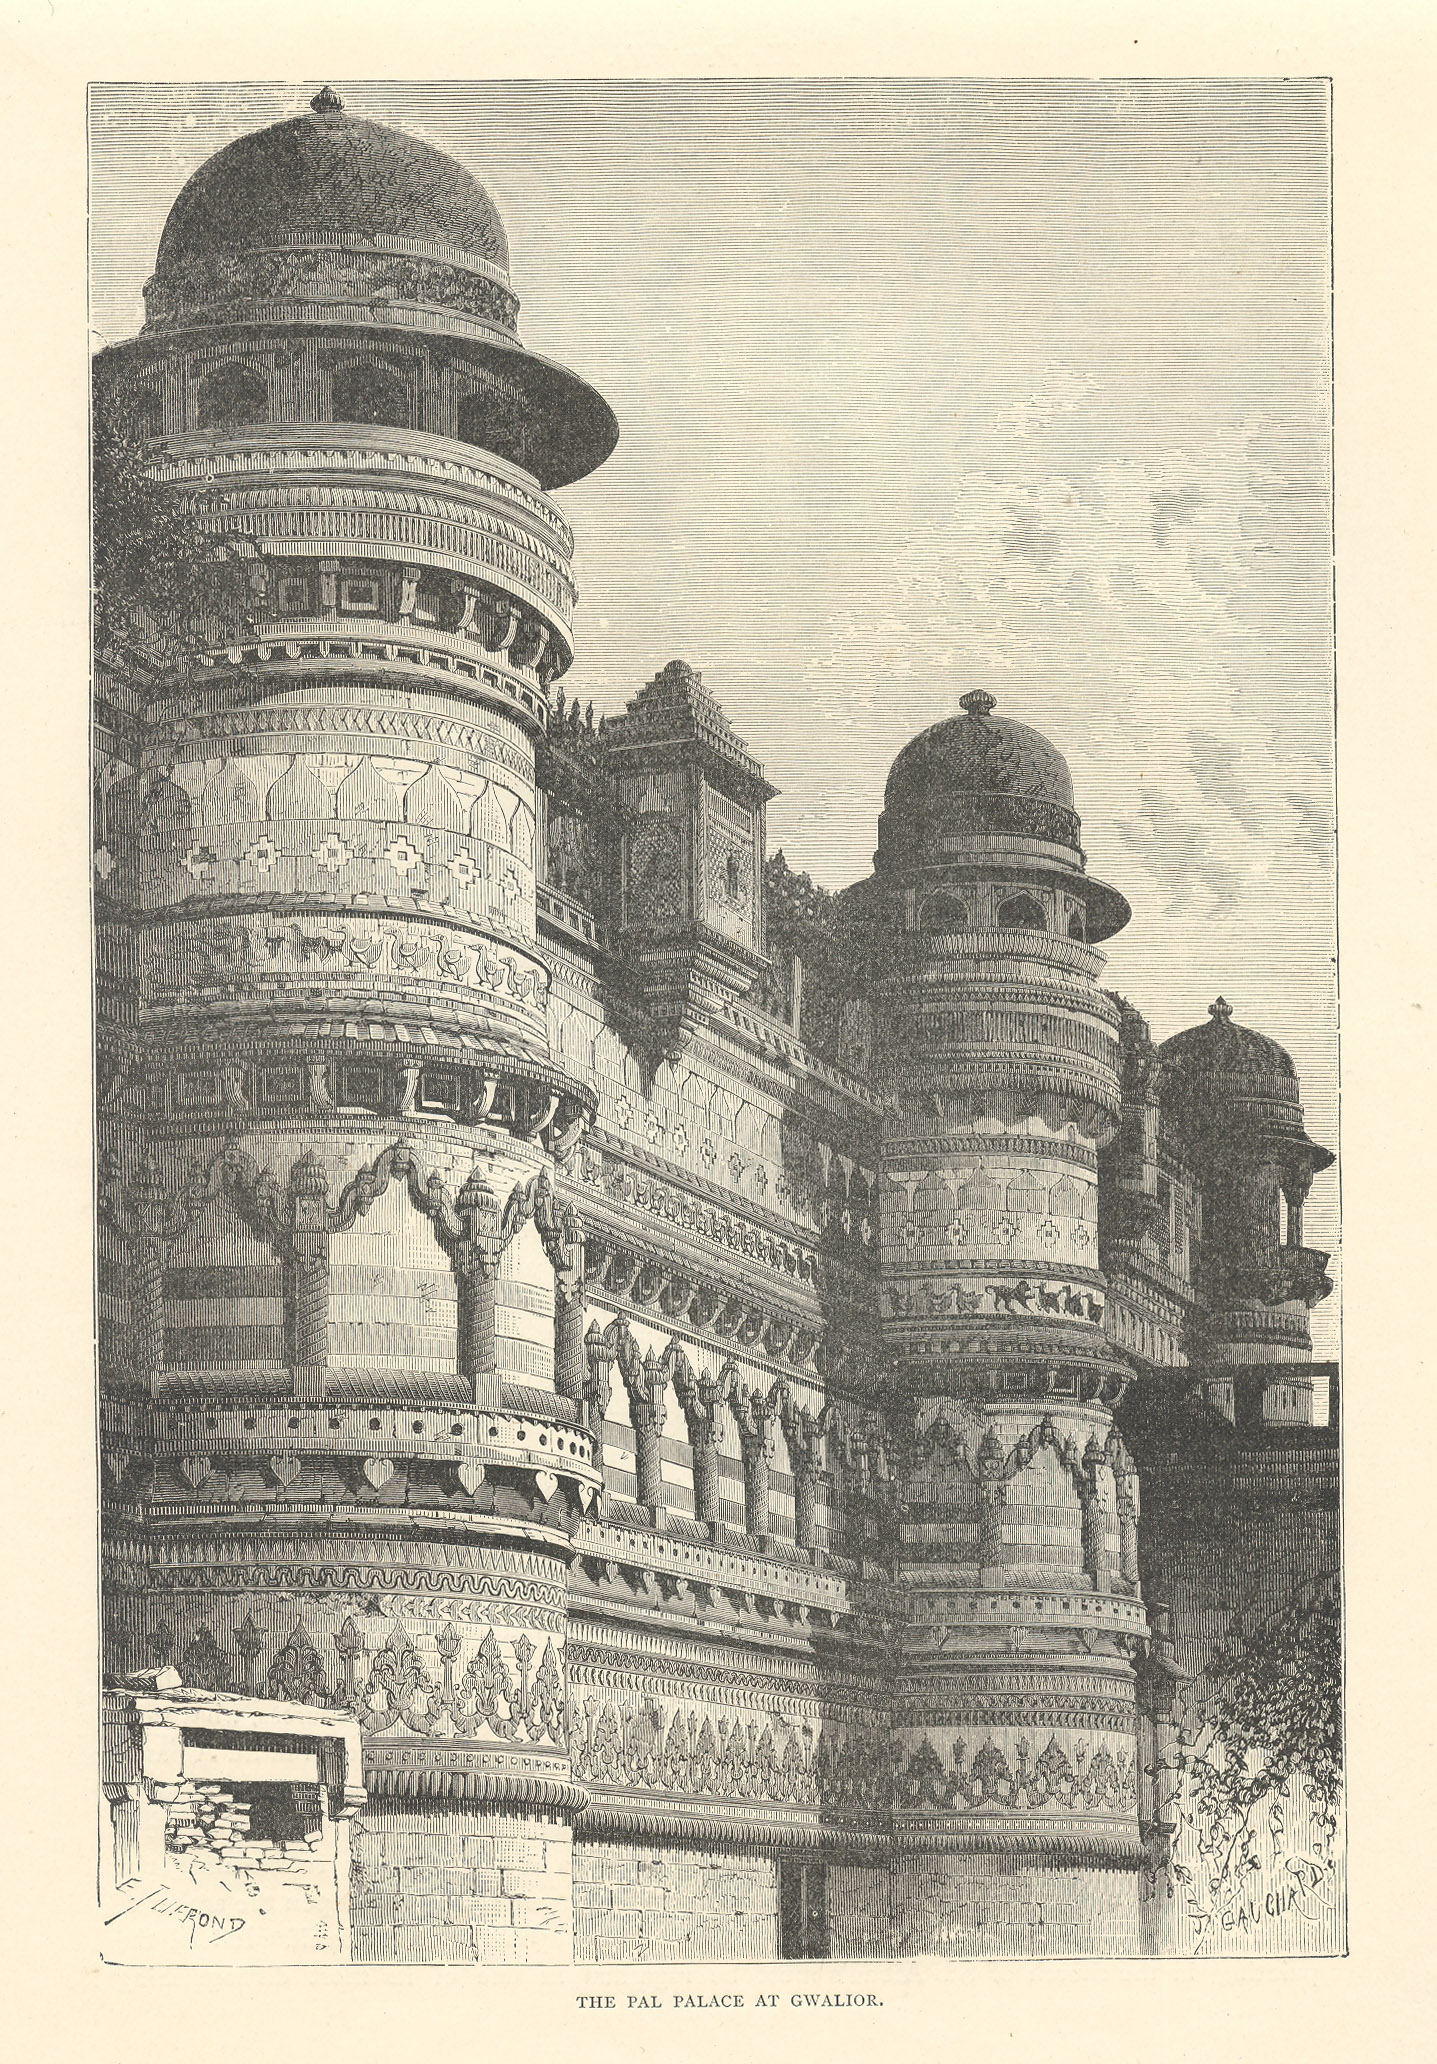 Gwalior palace Black and White Stock Photos & Images - Alamy